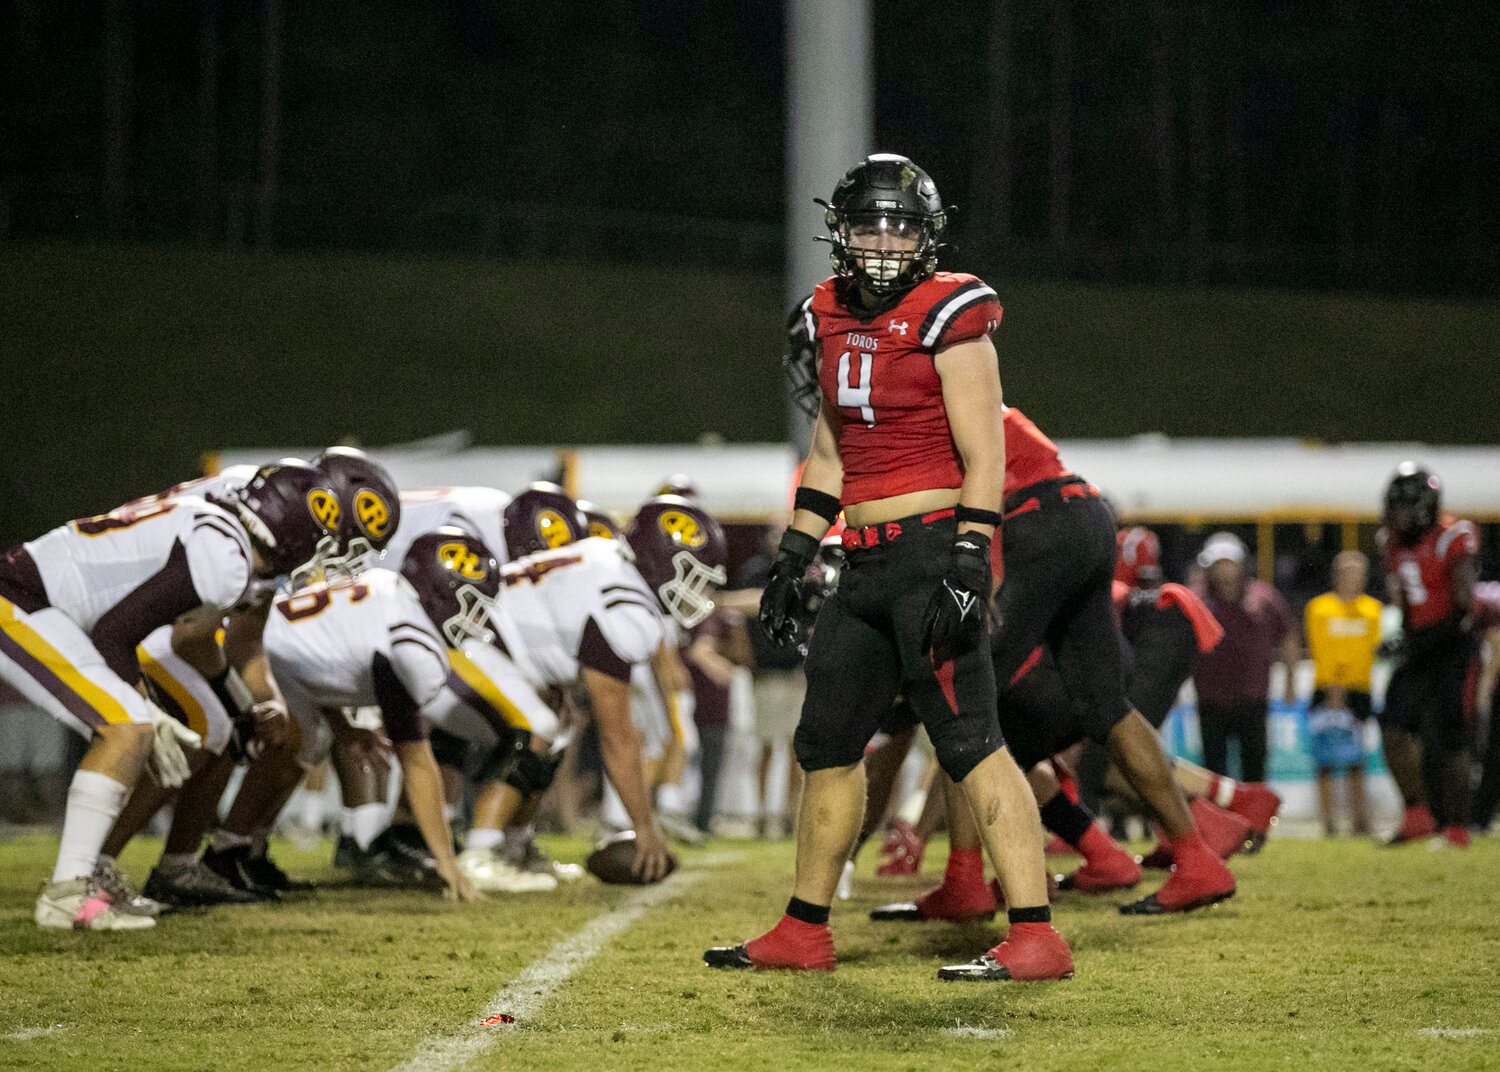 Toro junior linebacker Bishop Burkhalter waits for a defensive signal Friday night in Class 6A Region 1 action against the Robertsdale Golden Bears at home. Burkhalter and the defense kept the visitors off the board with a 45-0 win to move to 6-1 in the region standings.